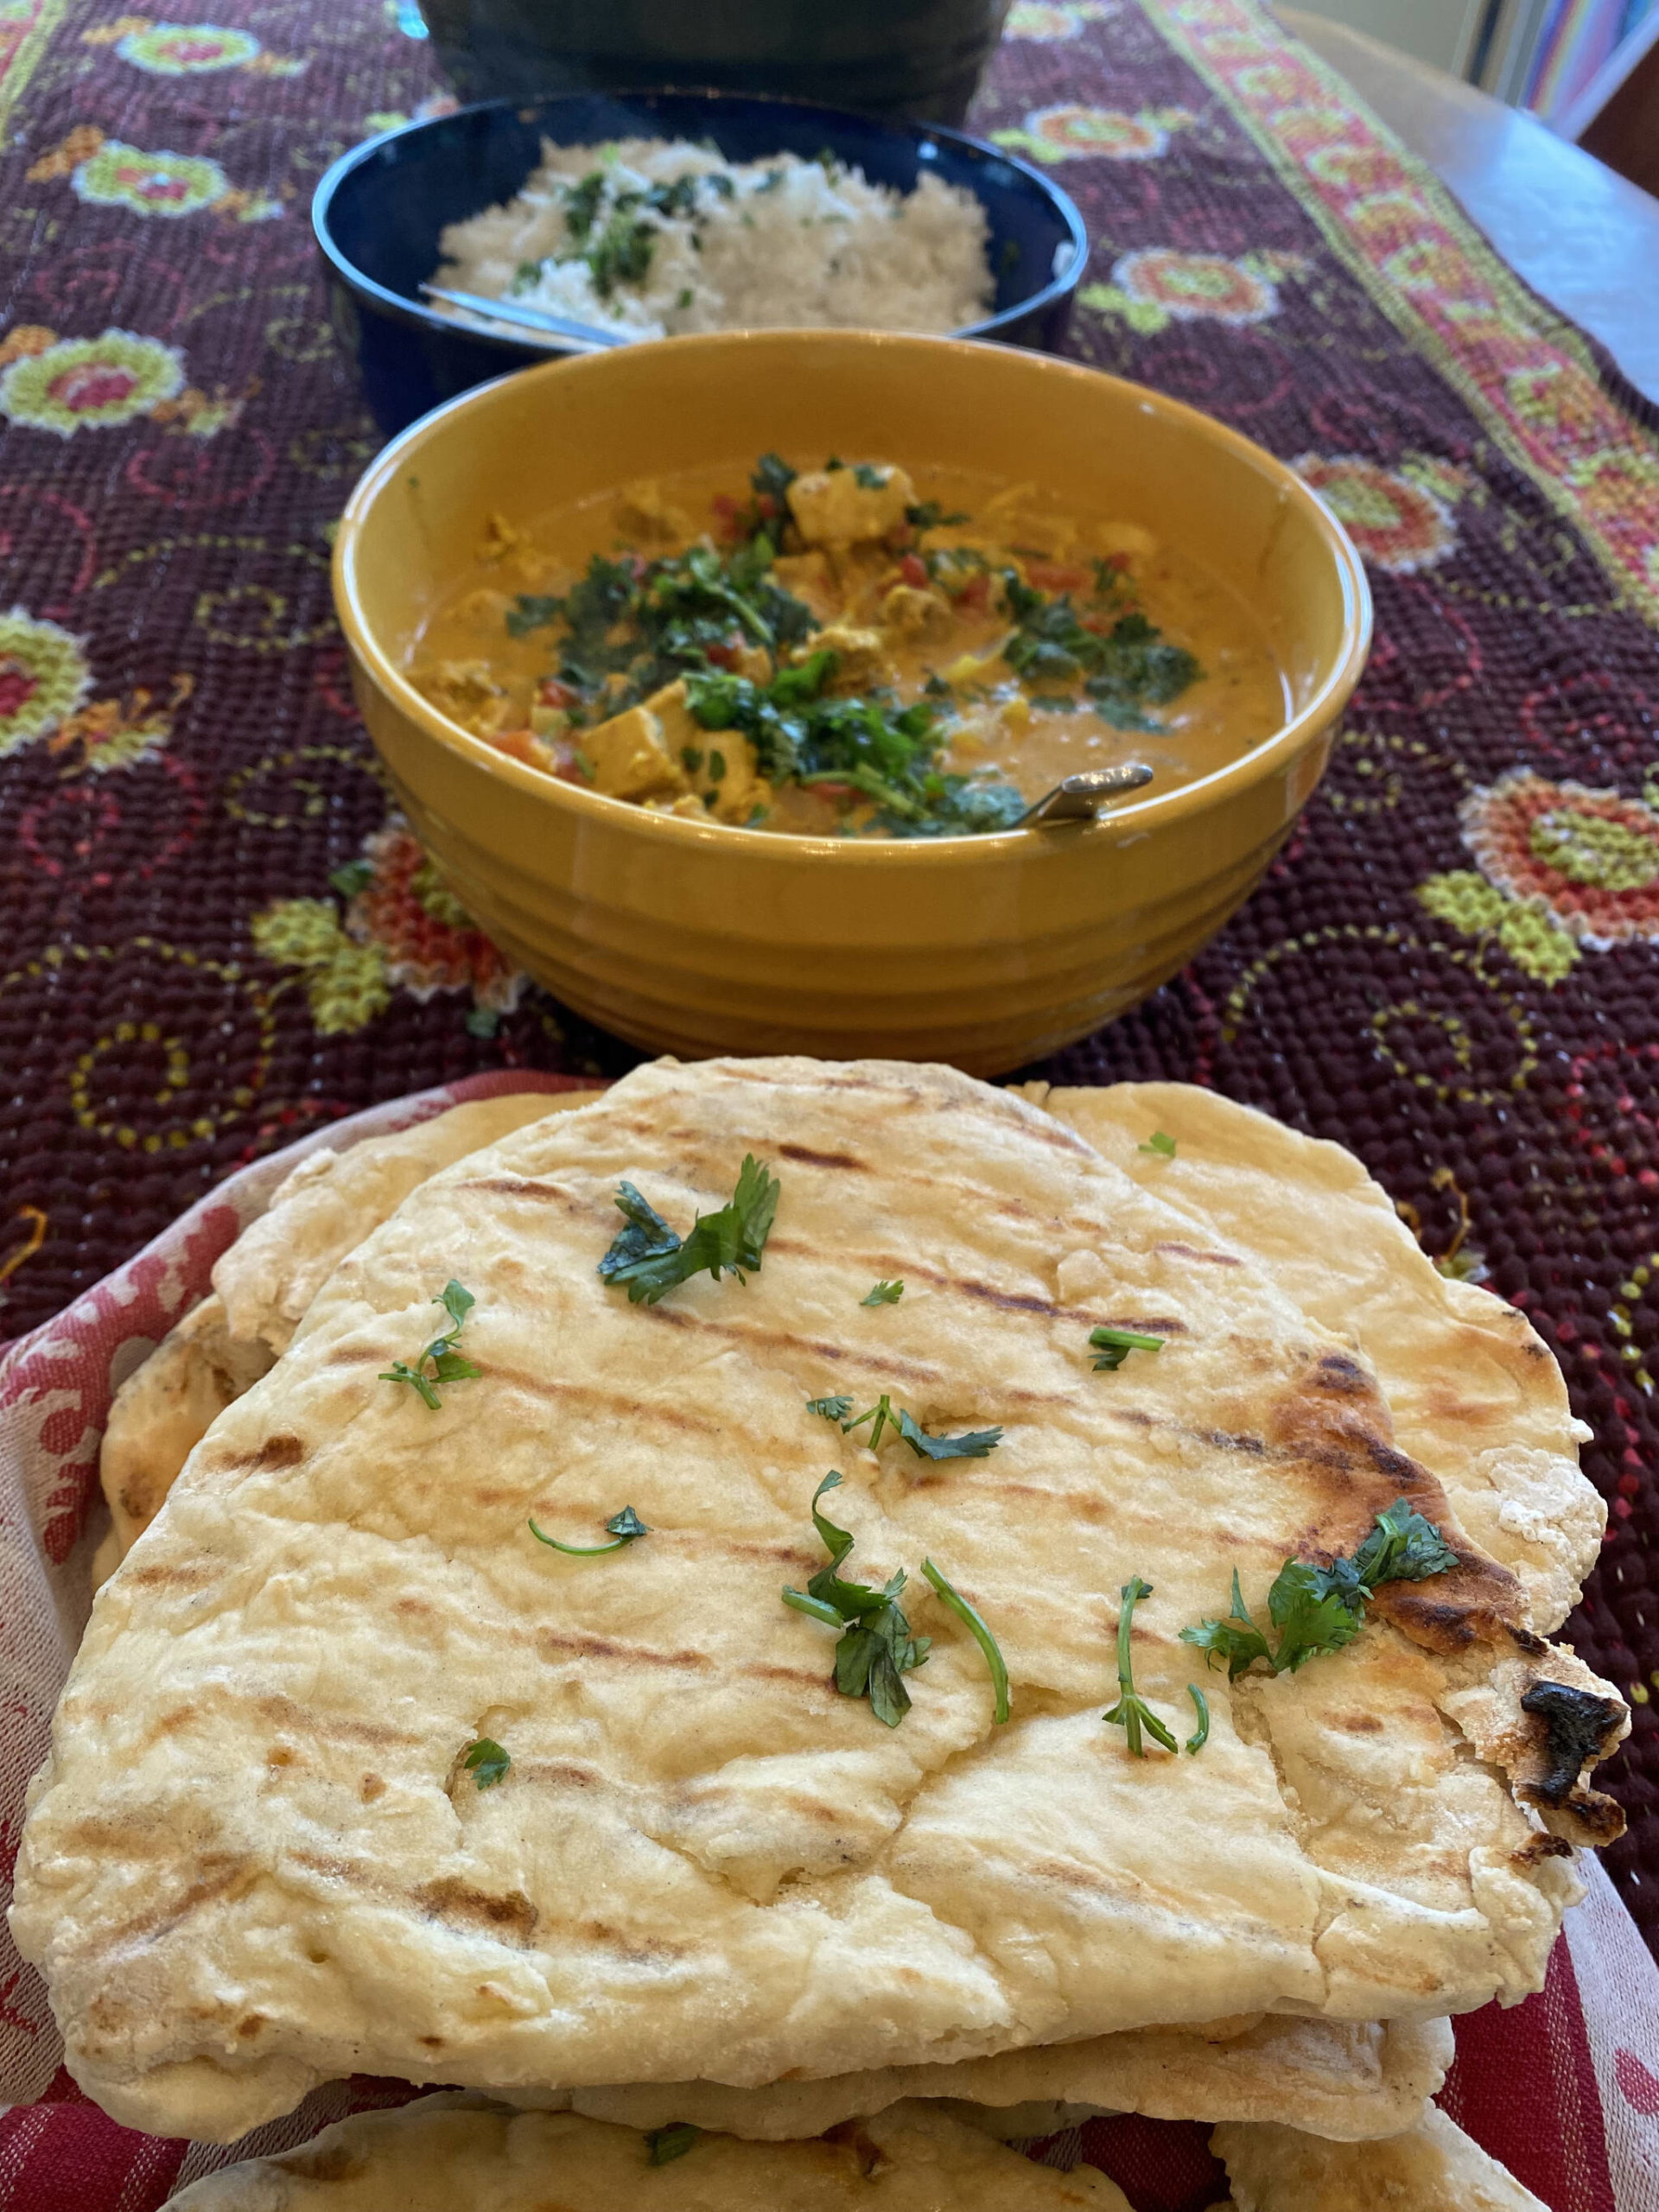 Homemade garlic naan is served with a meal of palak tofu, butter chicken, basmati rice and cucumber salad. (Photo by Tressa Dale/Peninsula Clarion)